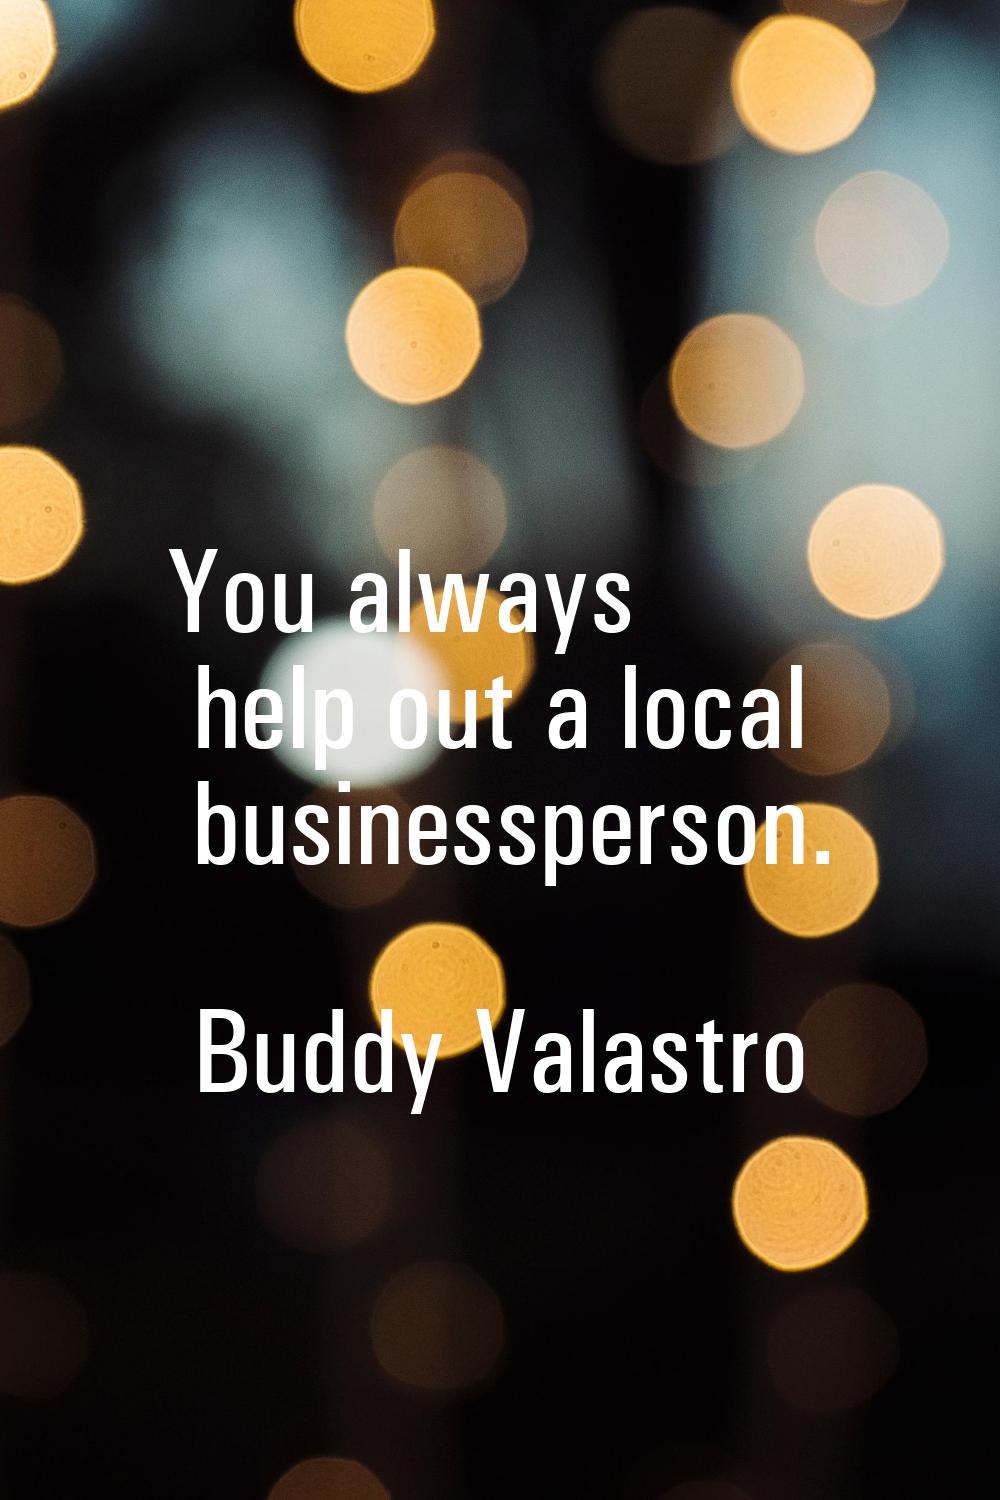 You always help out a local businessperson.